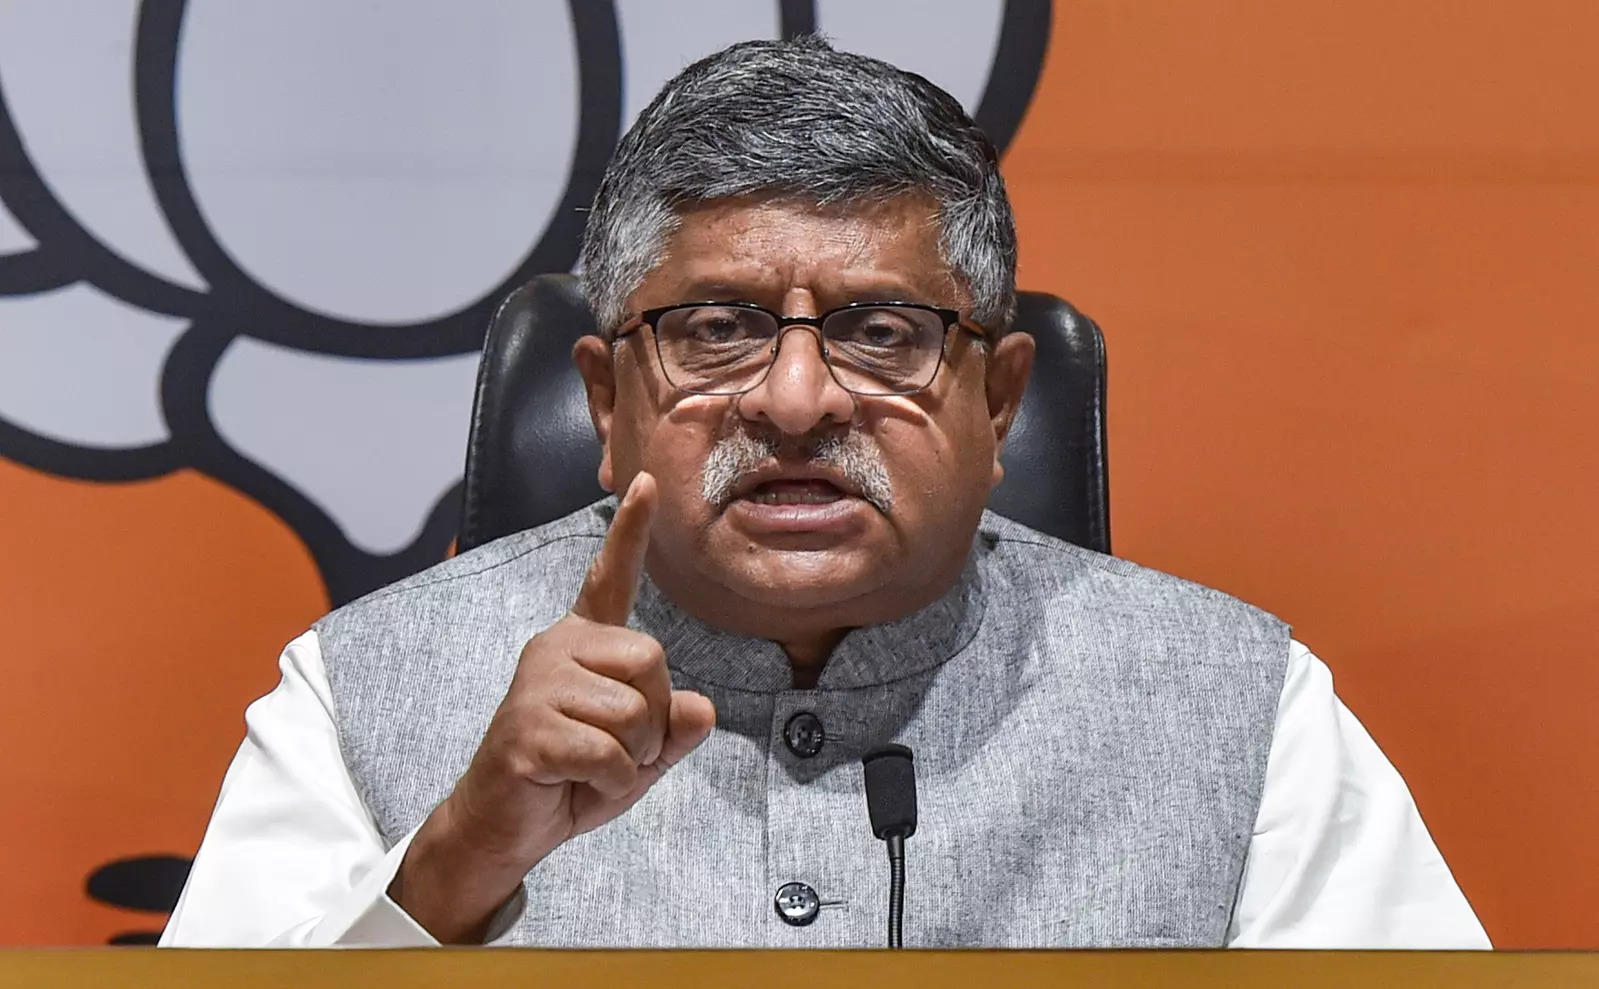 RS Prasad says Twitter denied him access to his account for an hour